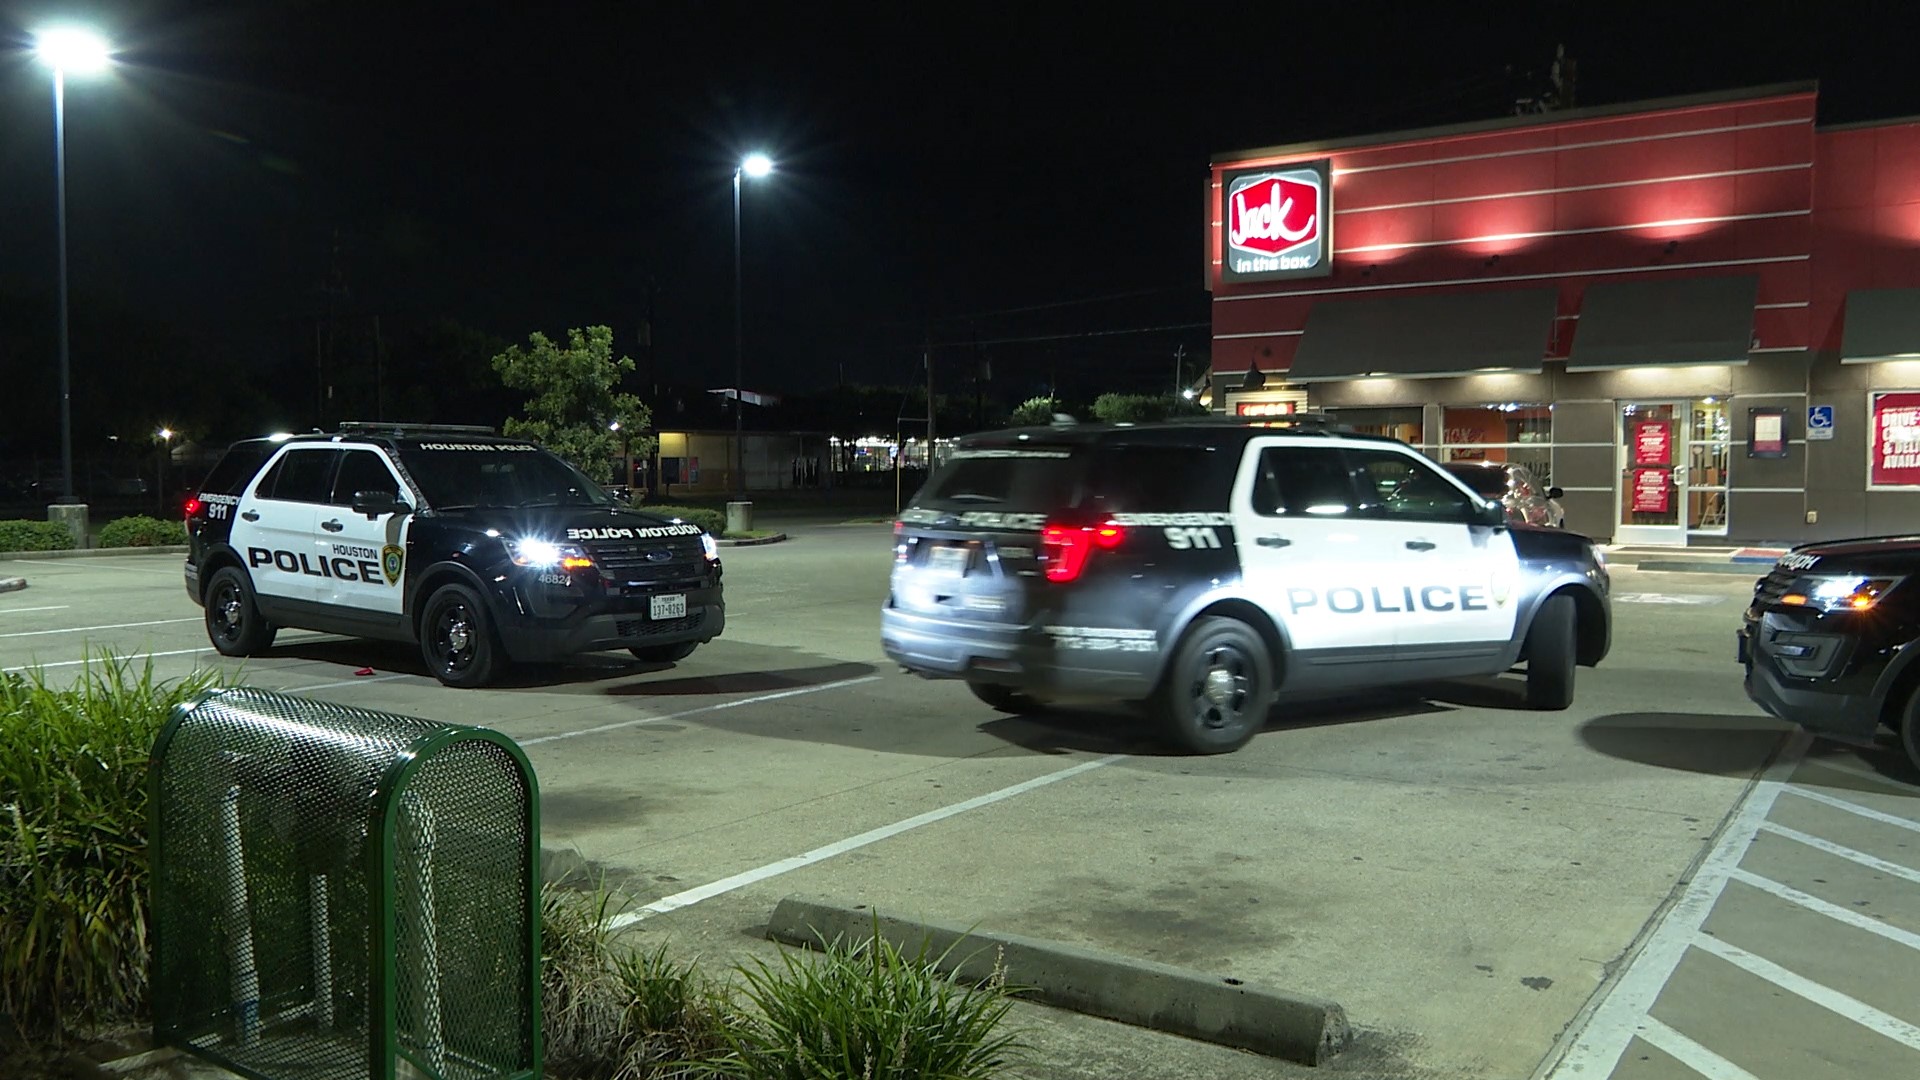 The shooting was reported shortly before 9:30 p.m. Tuesday in the 2200 block of Little York, said Lt. R. Willkens with the Houston Police Department.